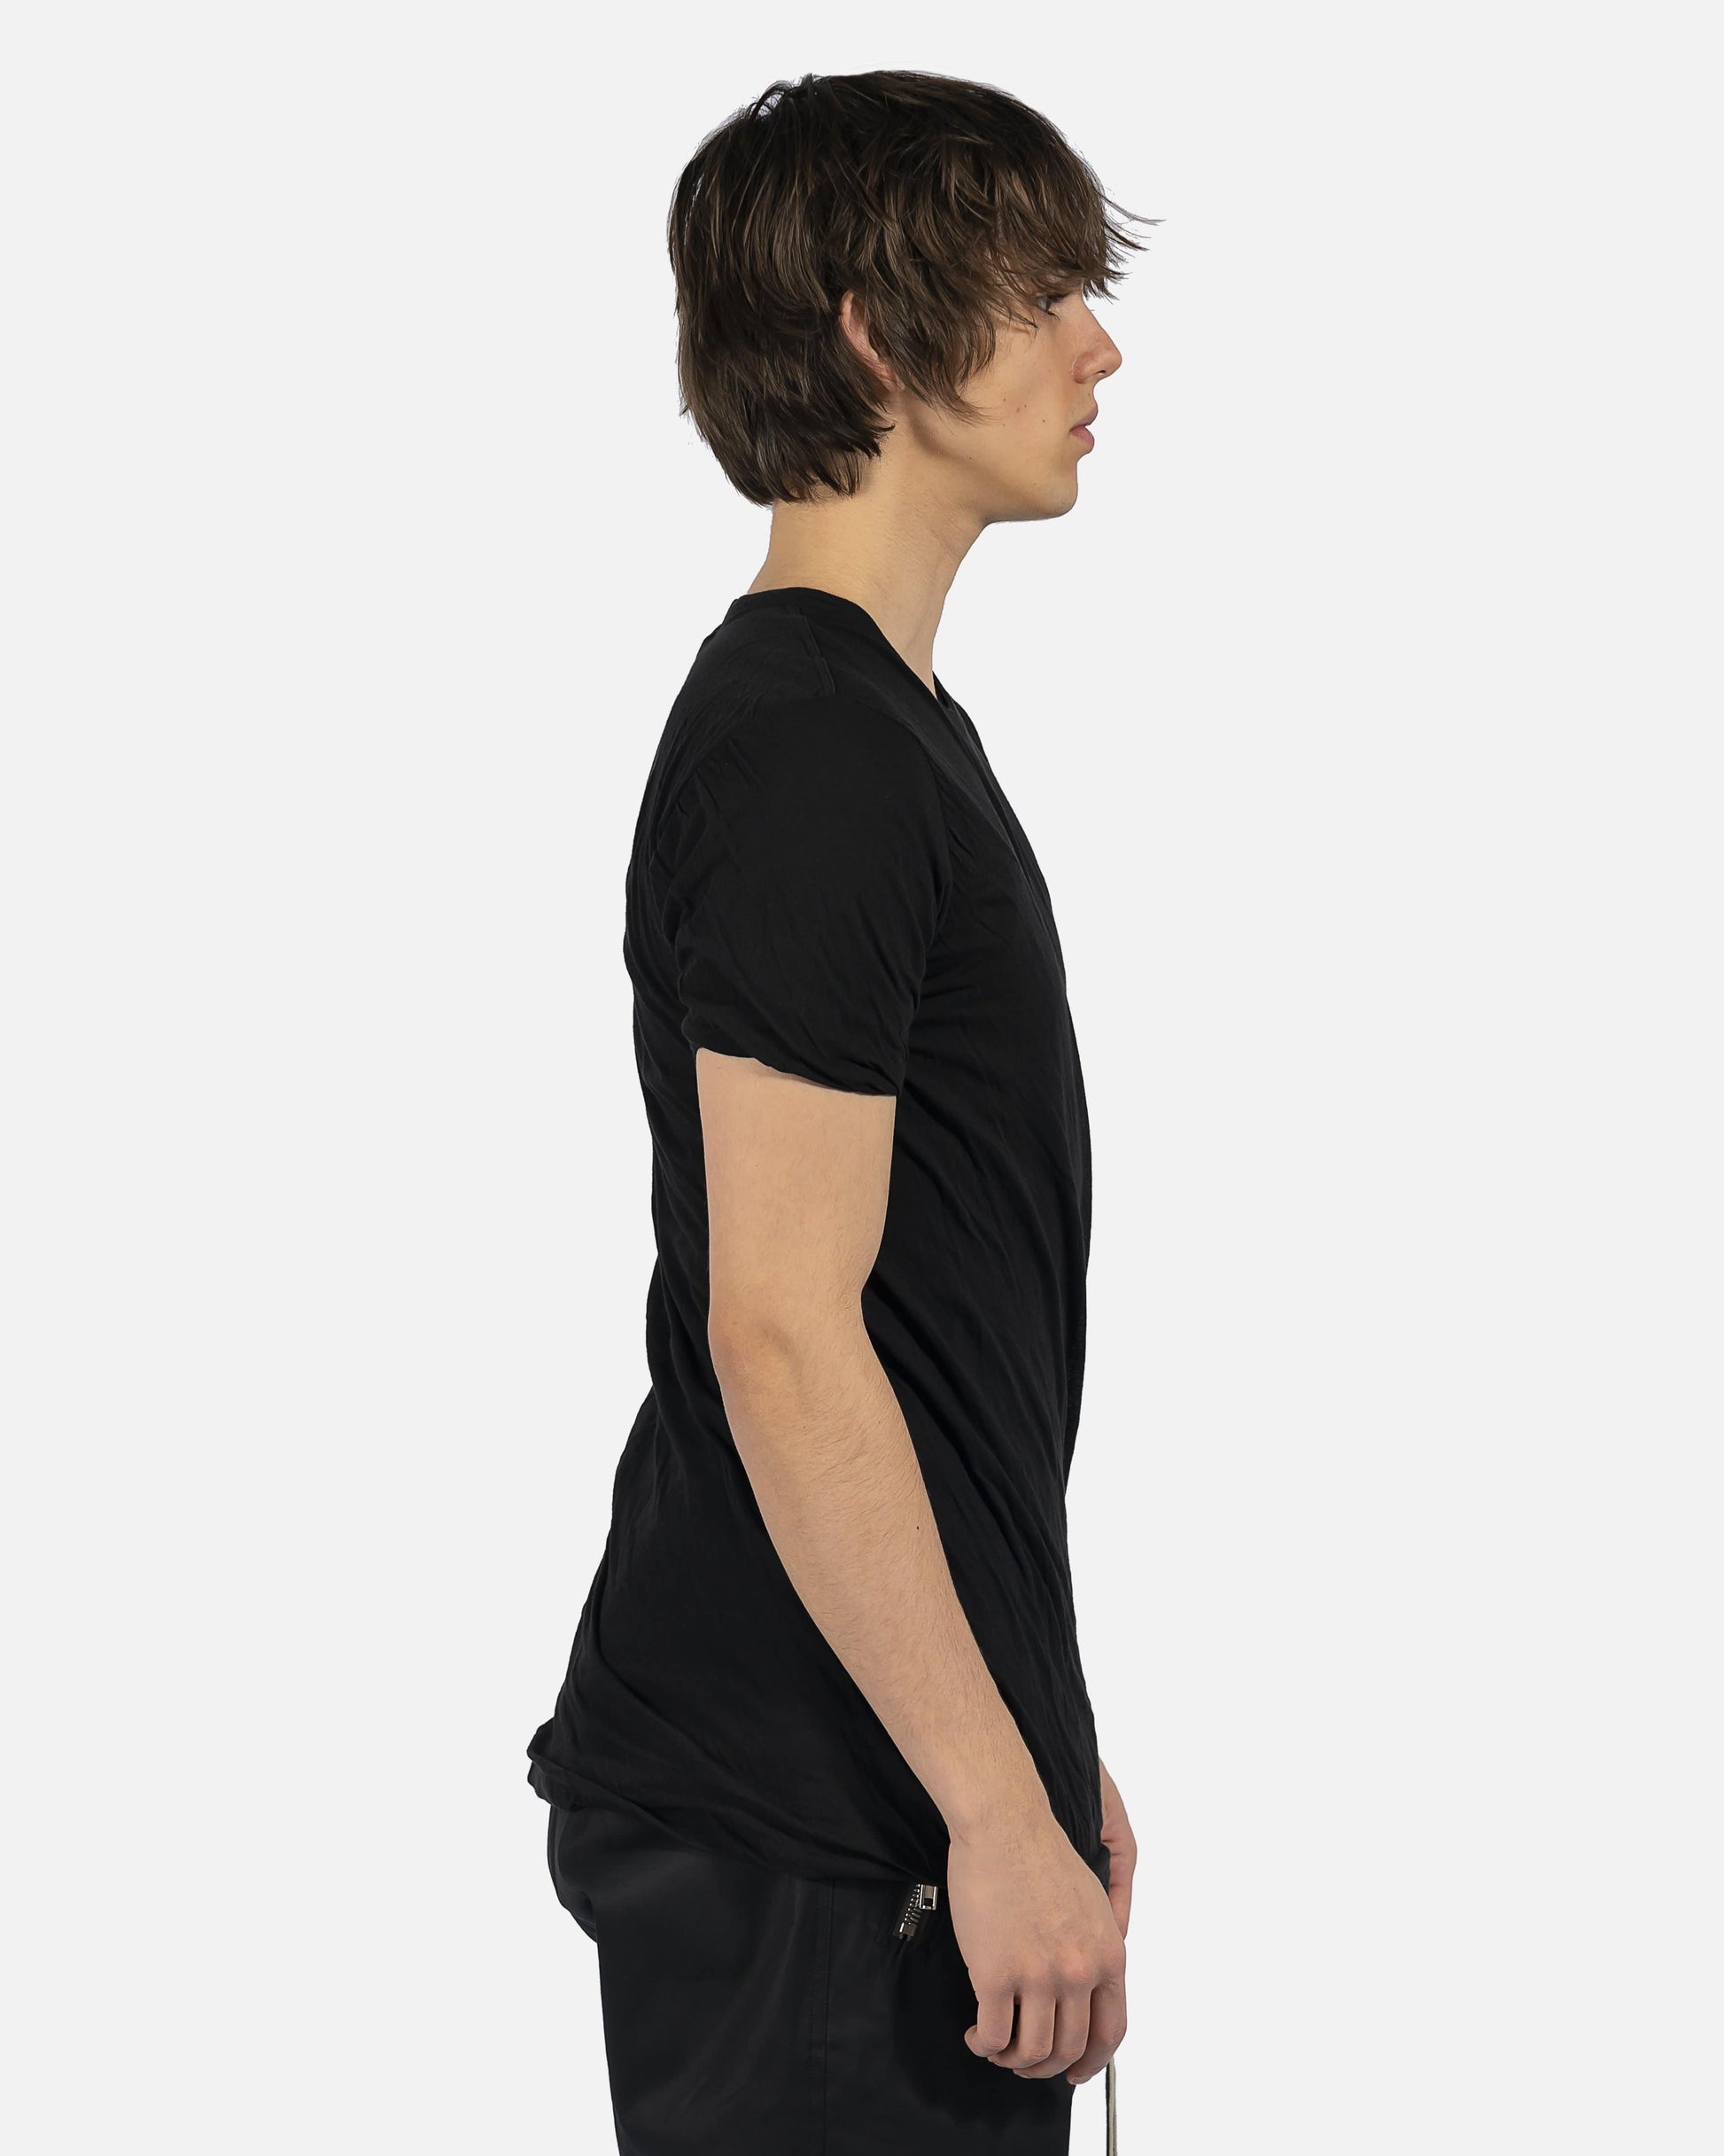 Rick Owens Men's T-Shirts Double Layer Shortsleeve T-Shirt in Black